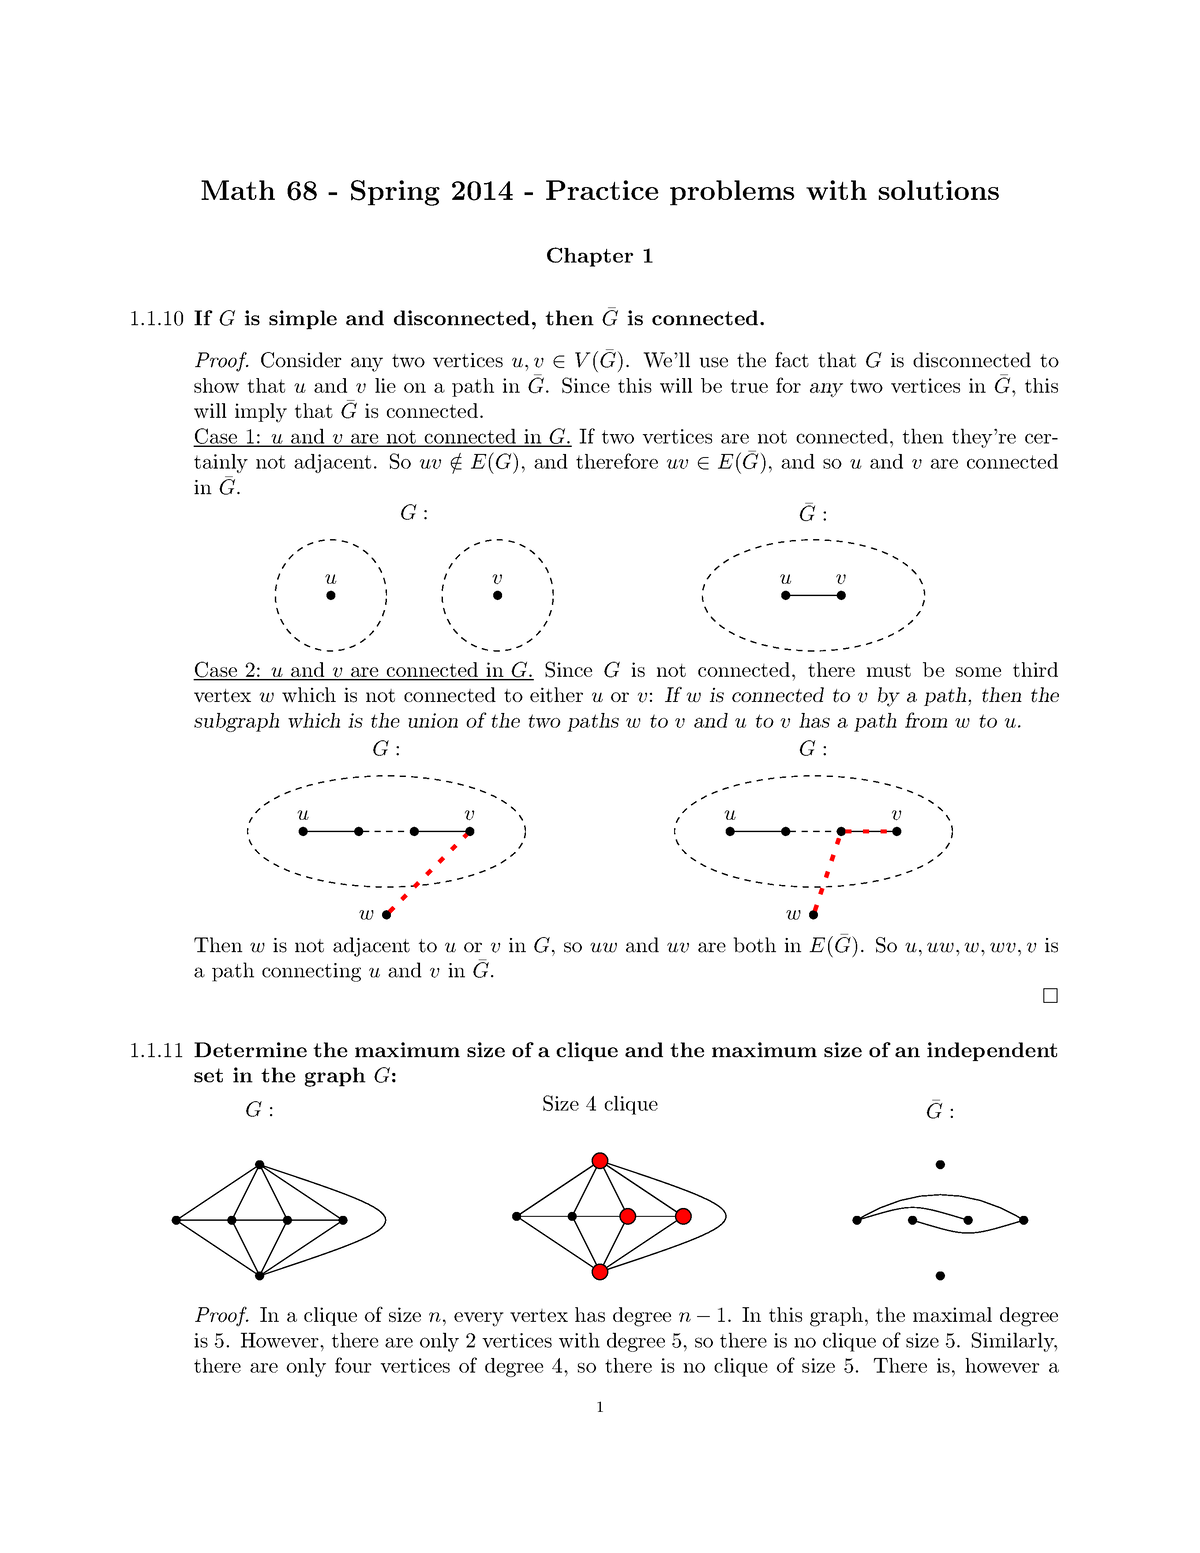 solutions-practice-problems-math-68-spring-2014-practice-problems